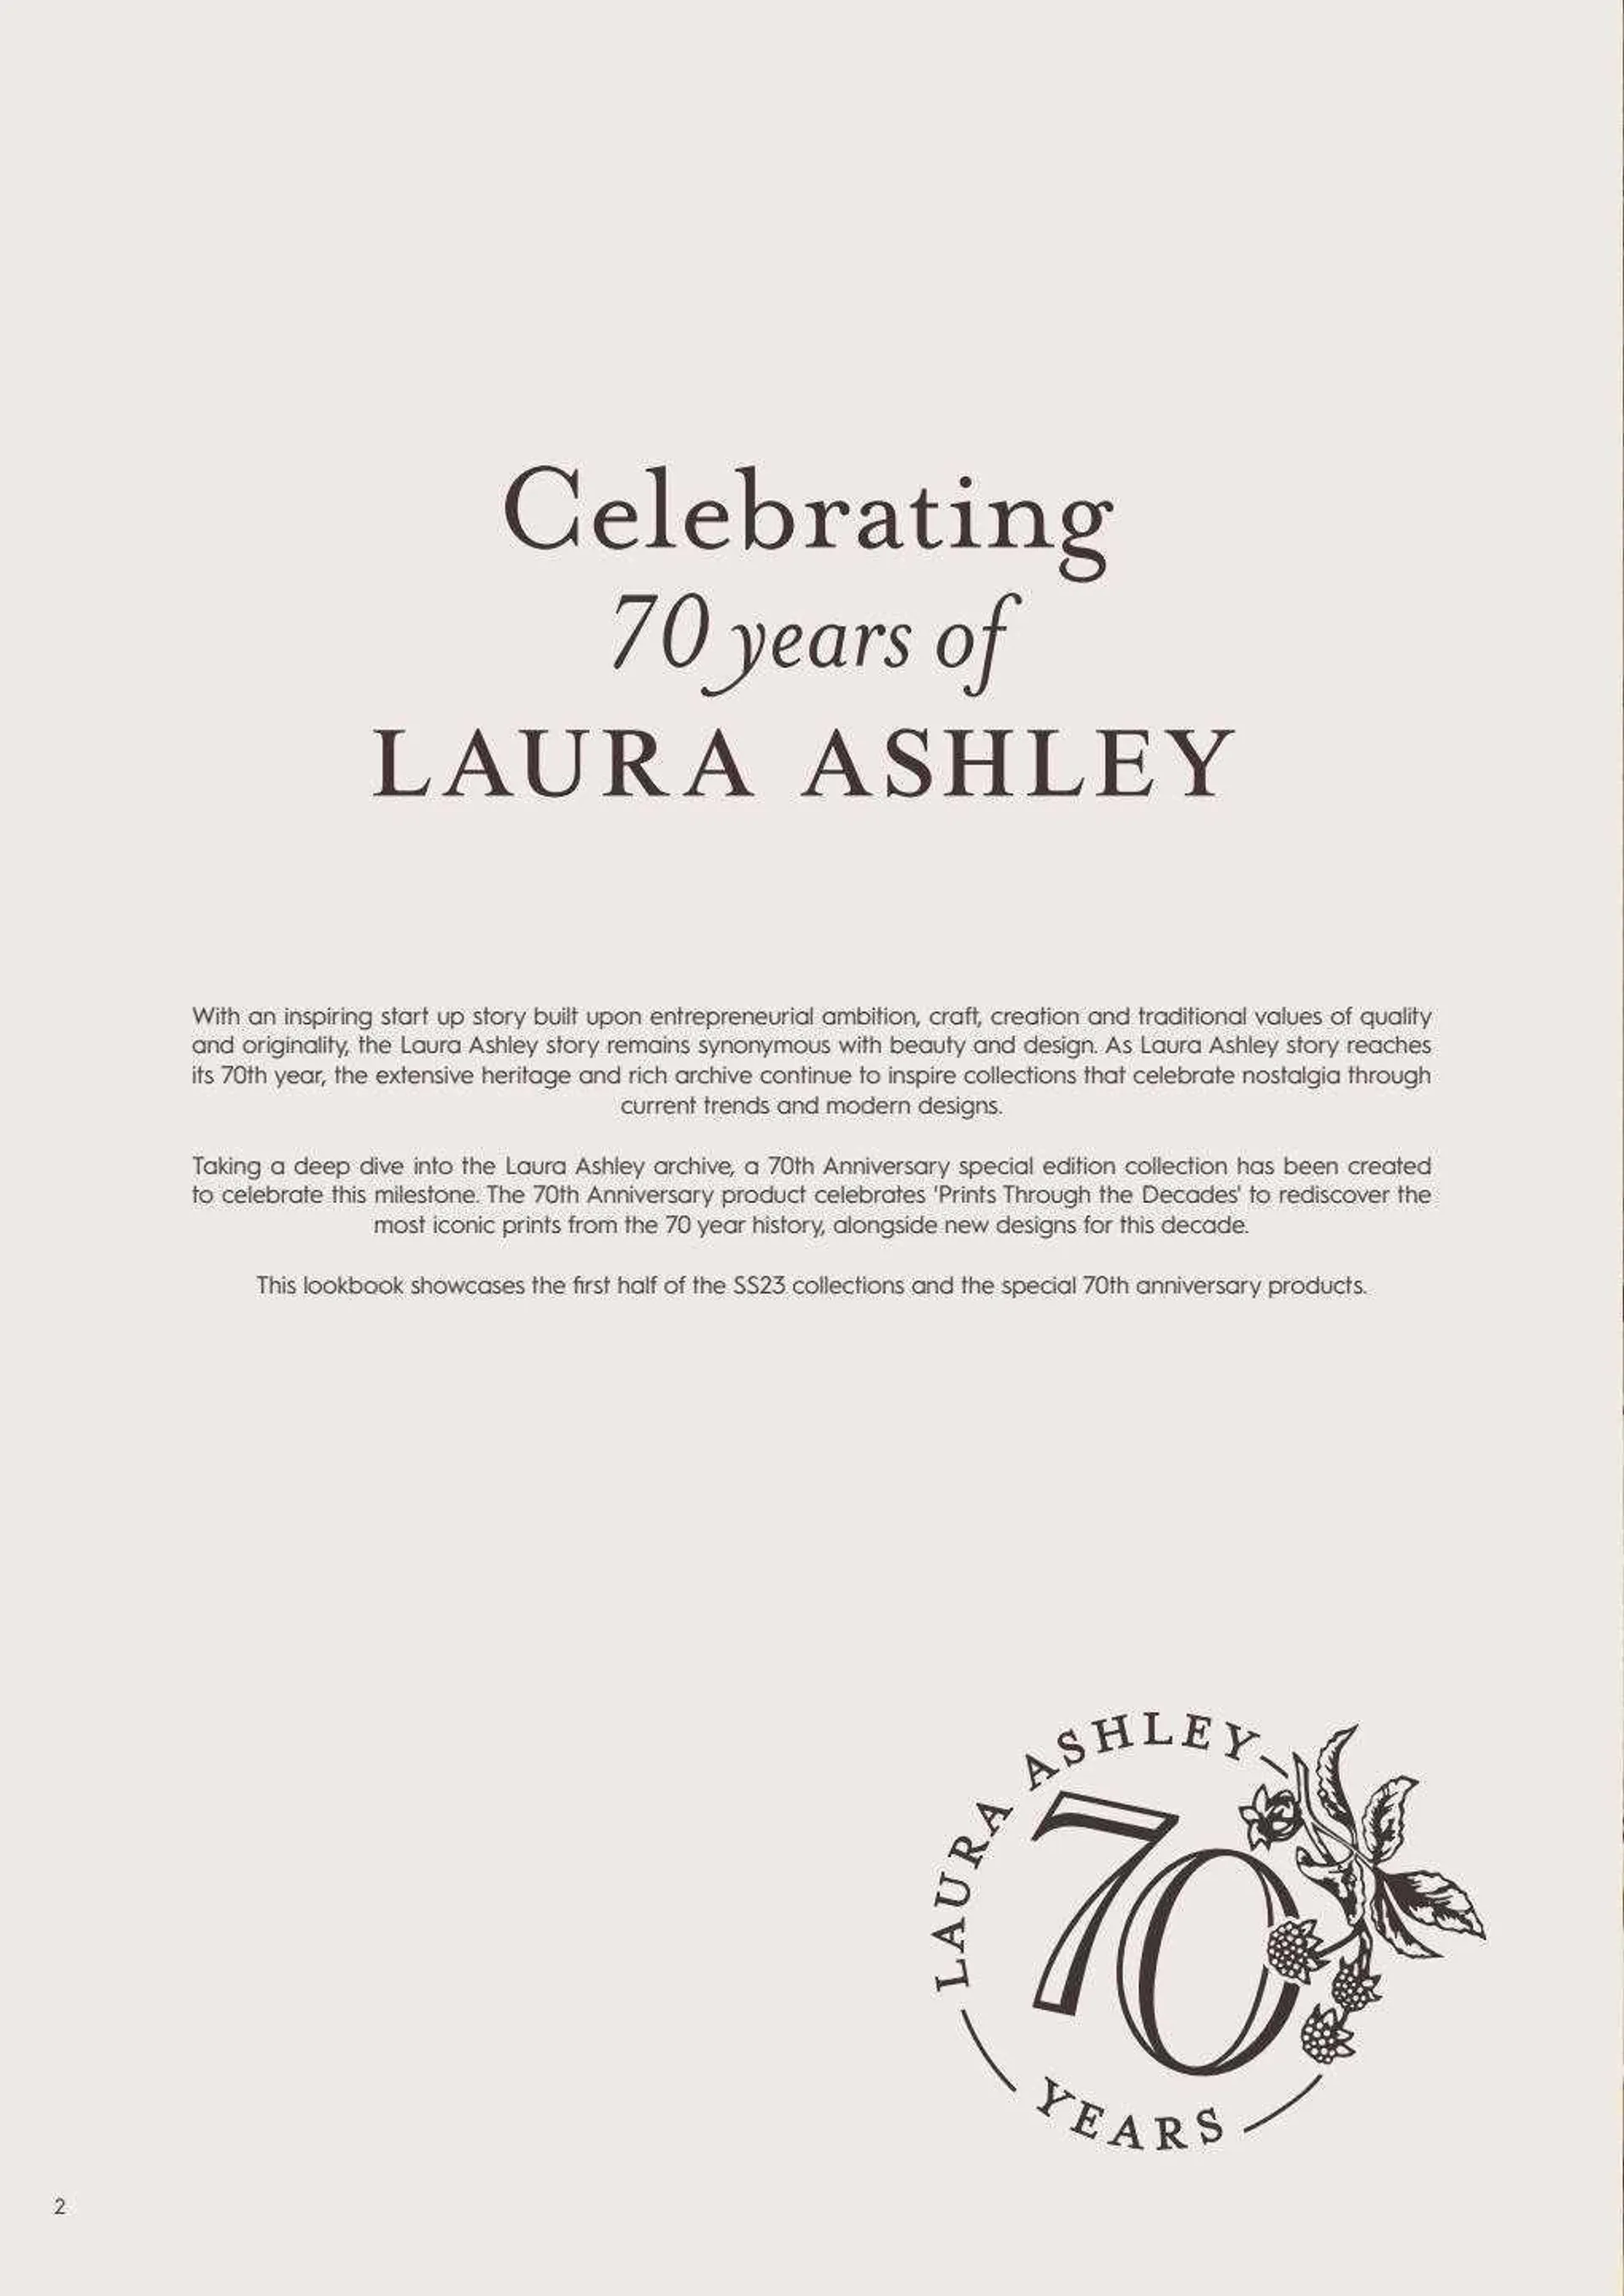 Laura Ashley Weekly Offers - 2